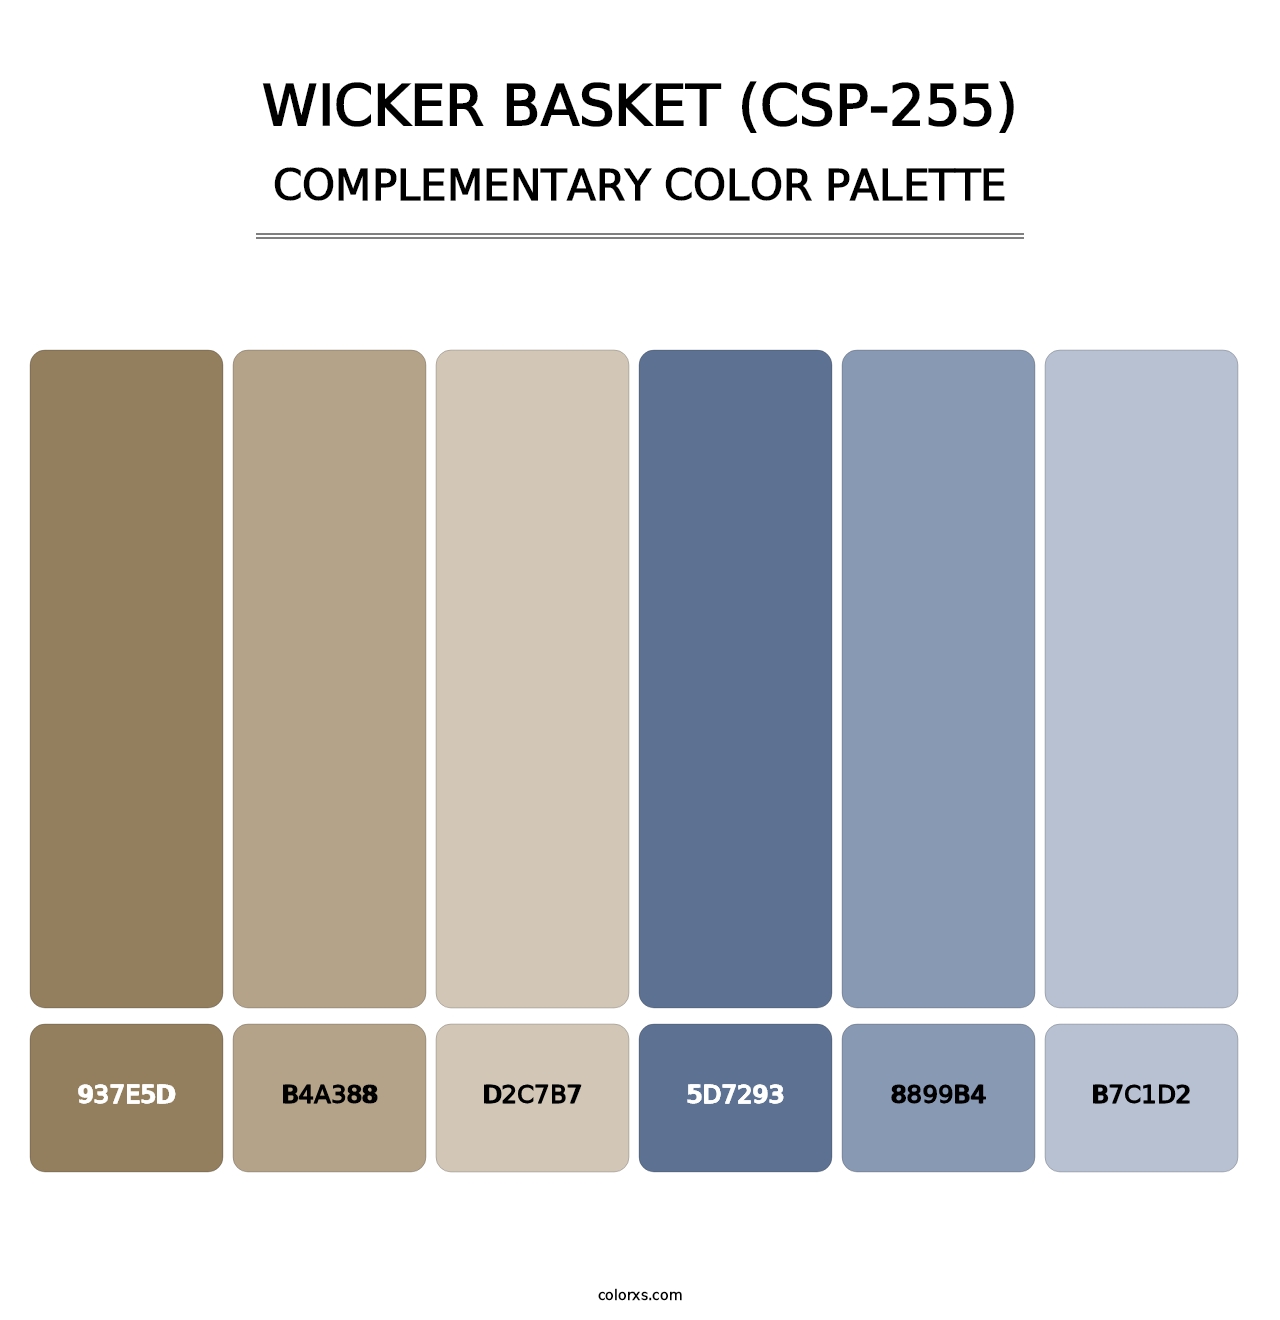 Wicker Basket (CSP-255) - Complementary Color Palette